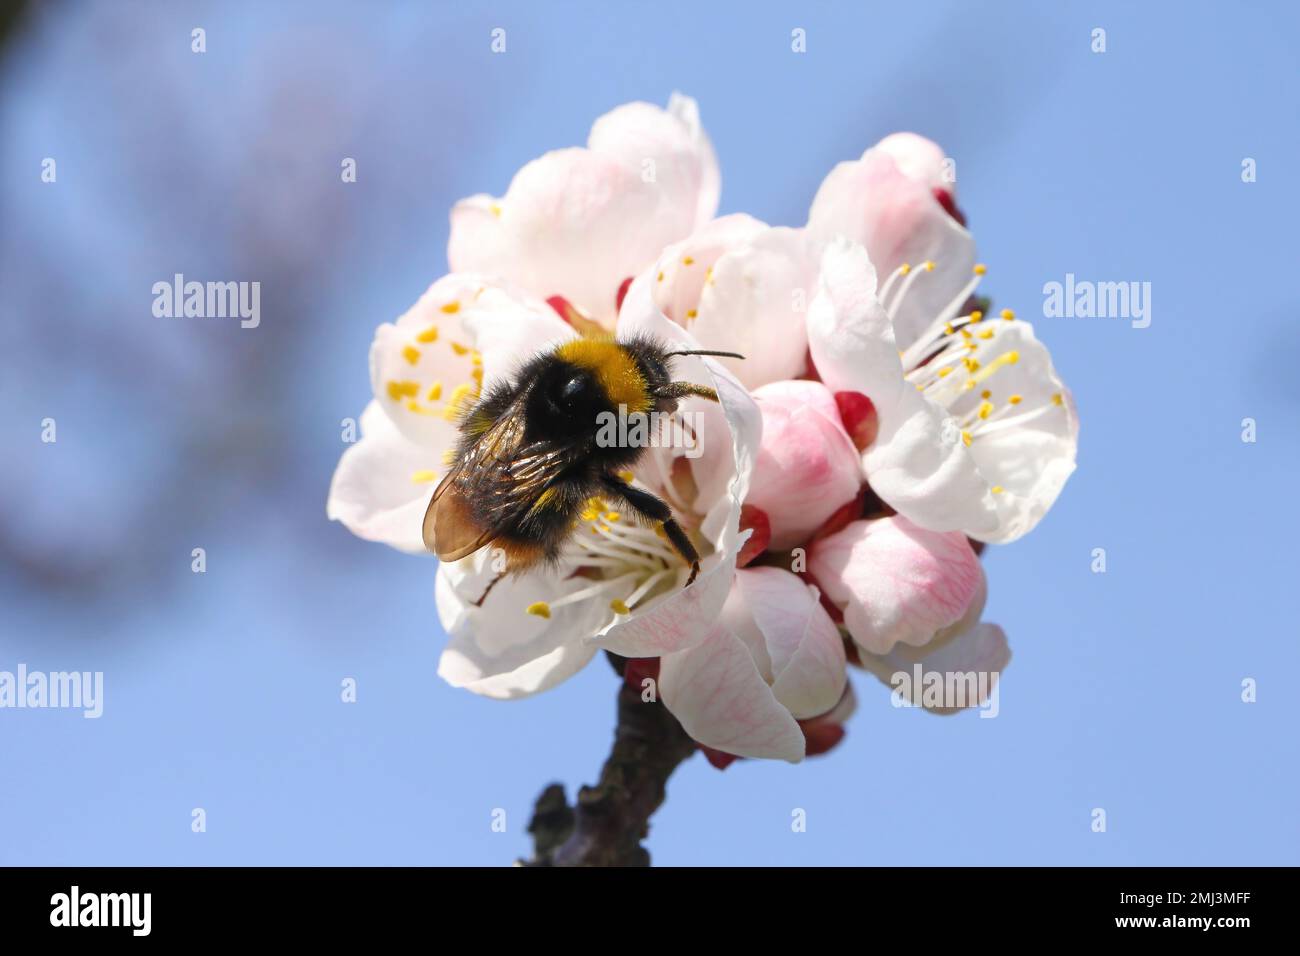 Bumblebee (Bombus sp.). Pollinating apricot tree in spring blooming garden. Bumble bee gathering nectar pollen honey in apricot tree flowers. Stock Photo